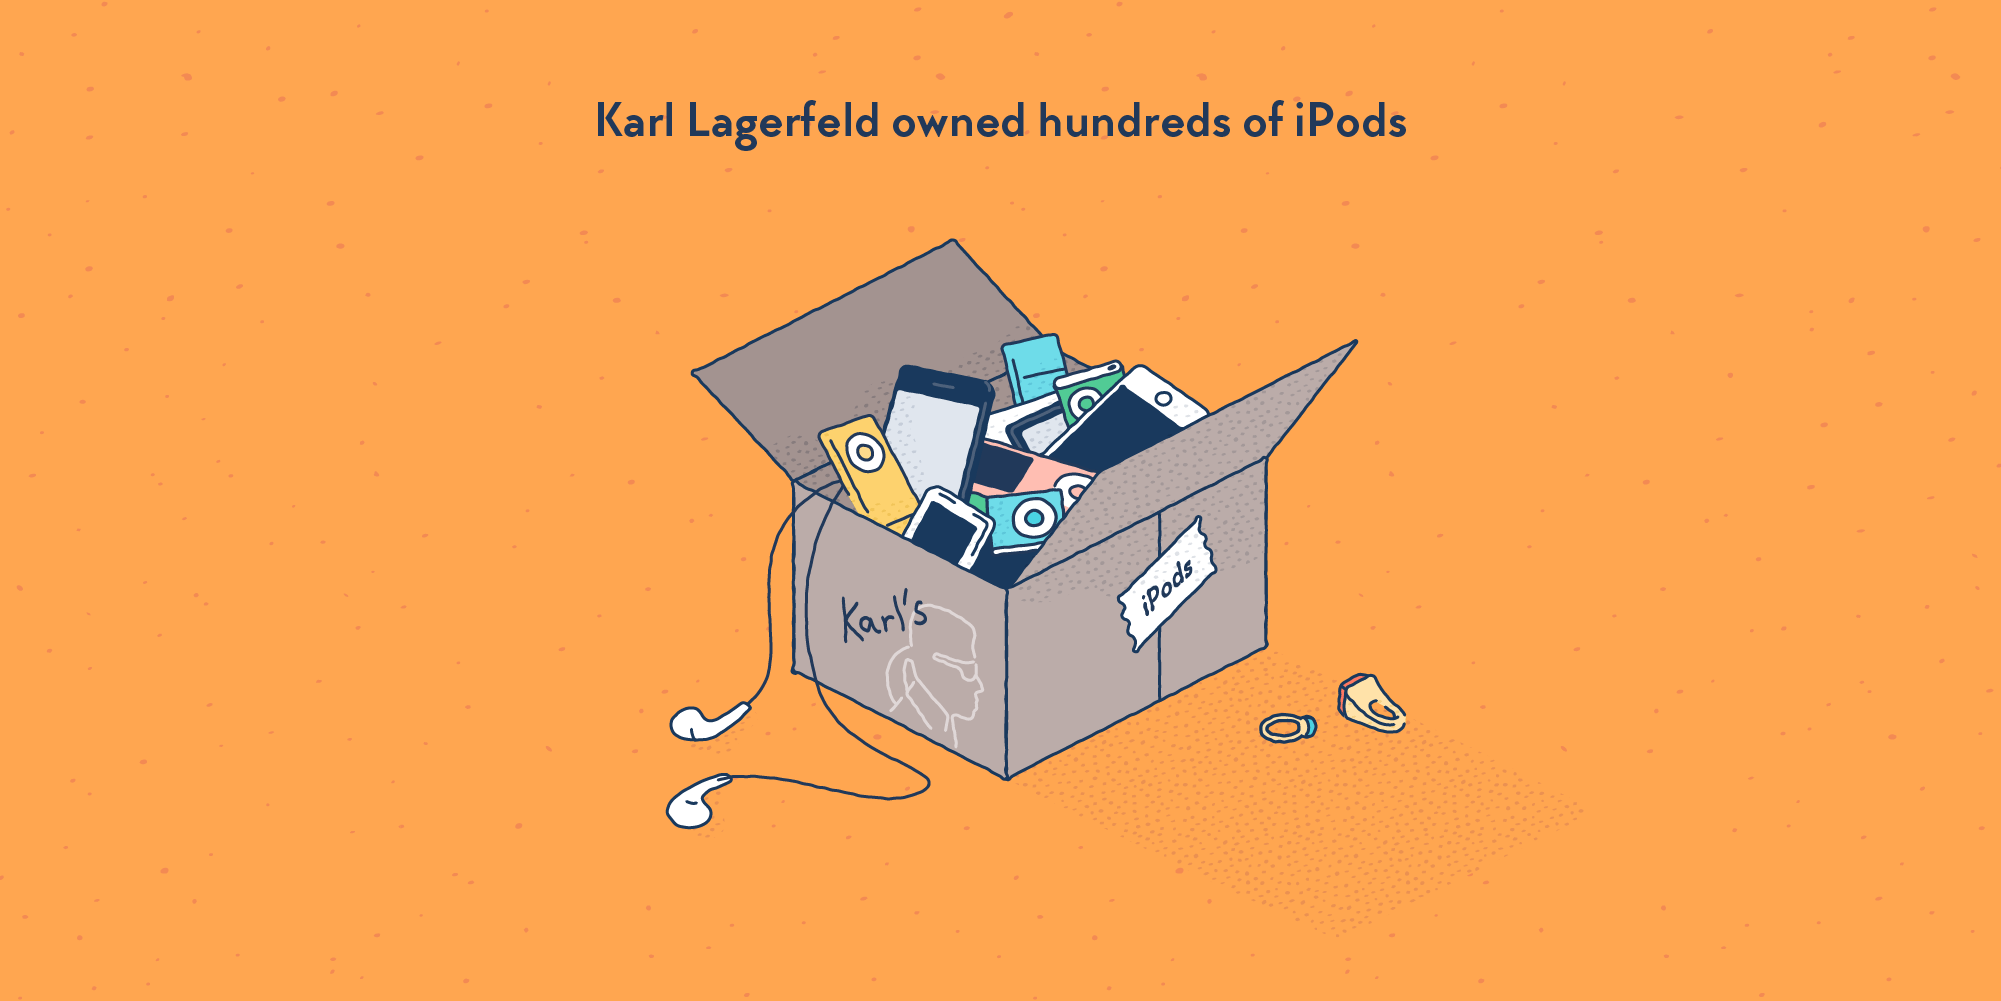 A cardboard box full of iPods, with “Karl’s” written on it.